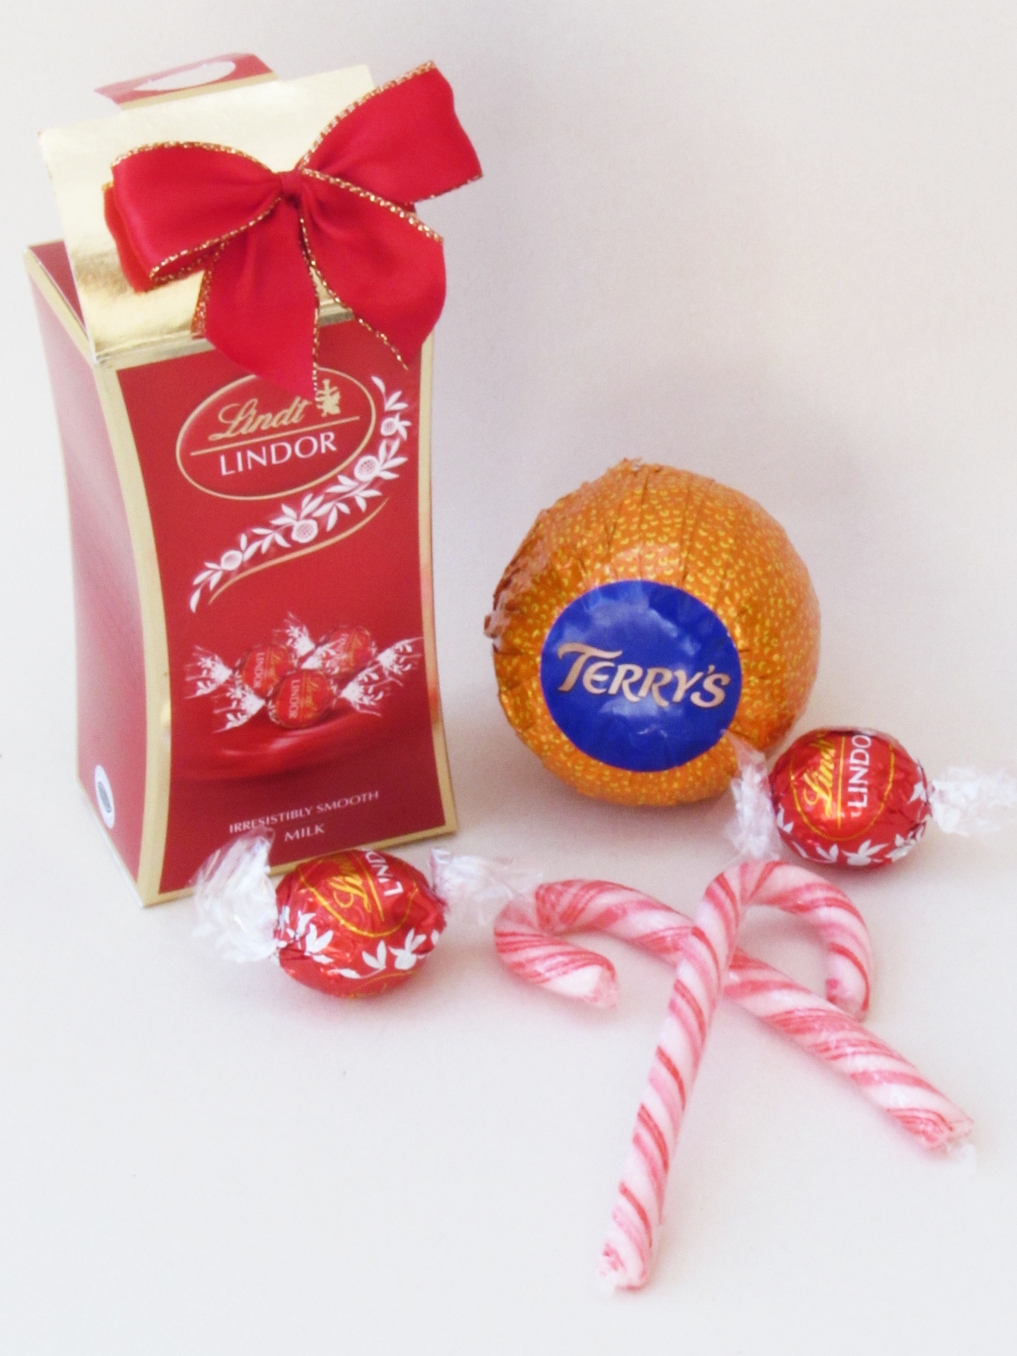 Terry’s Chocolate Orange, Lindor and Candy Canes